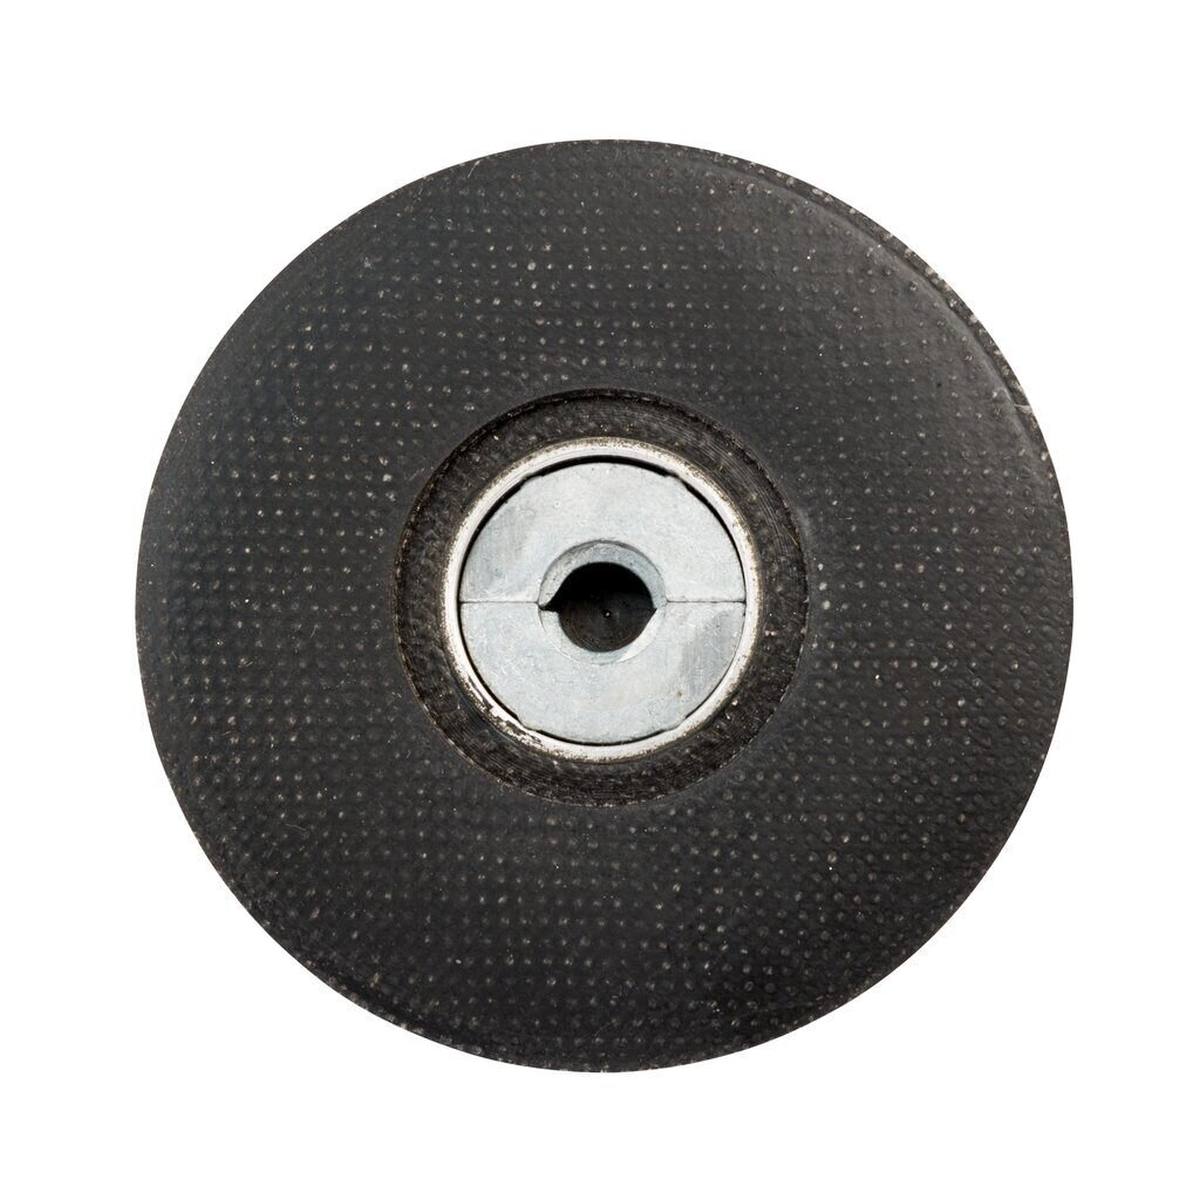 3M Roloc backing pad DR-AC with M14 mount, 76.2 mm, medium #84999